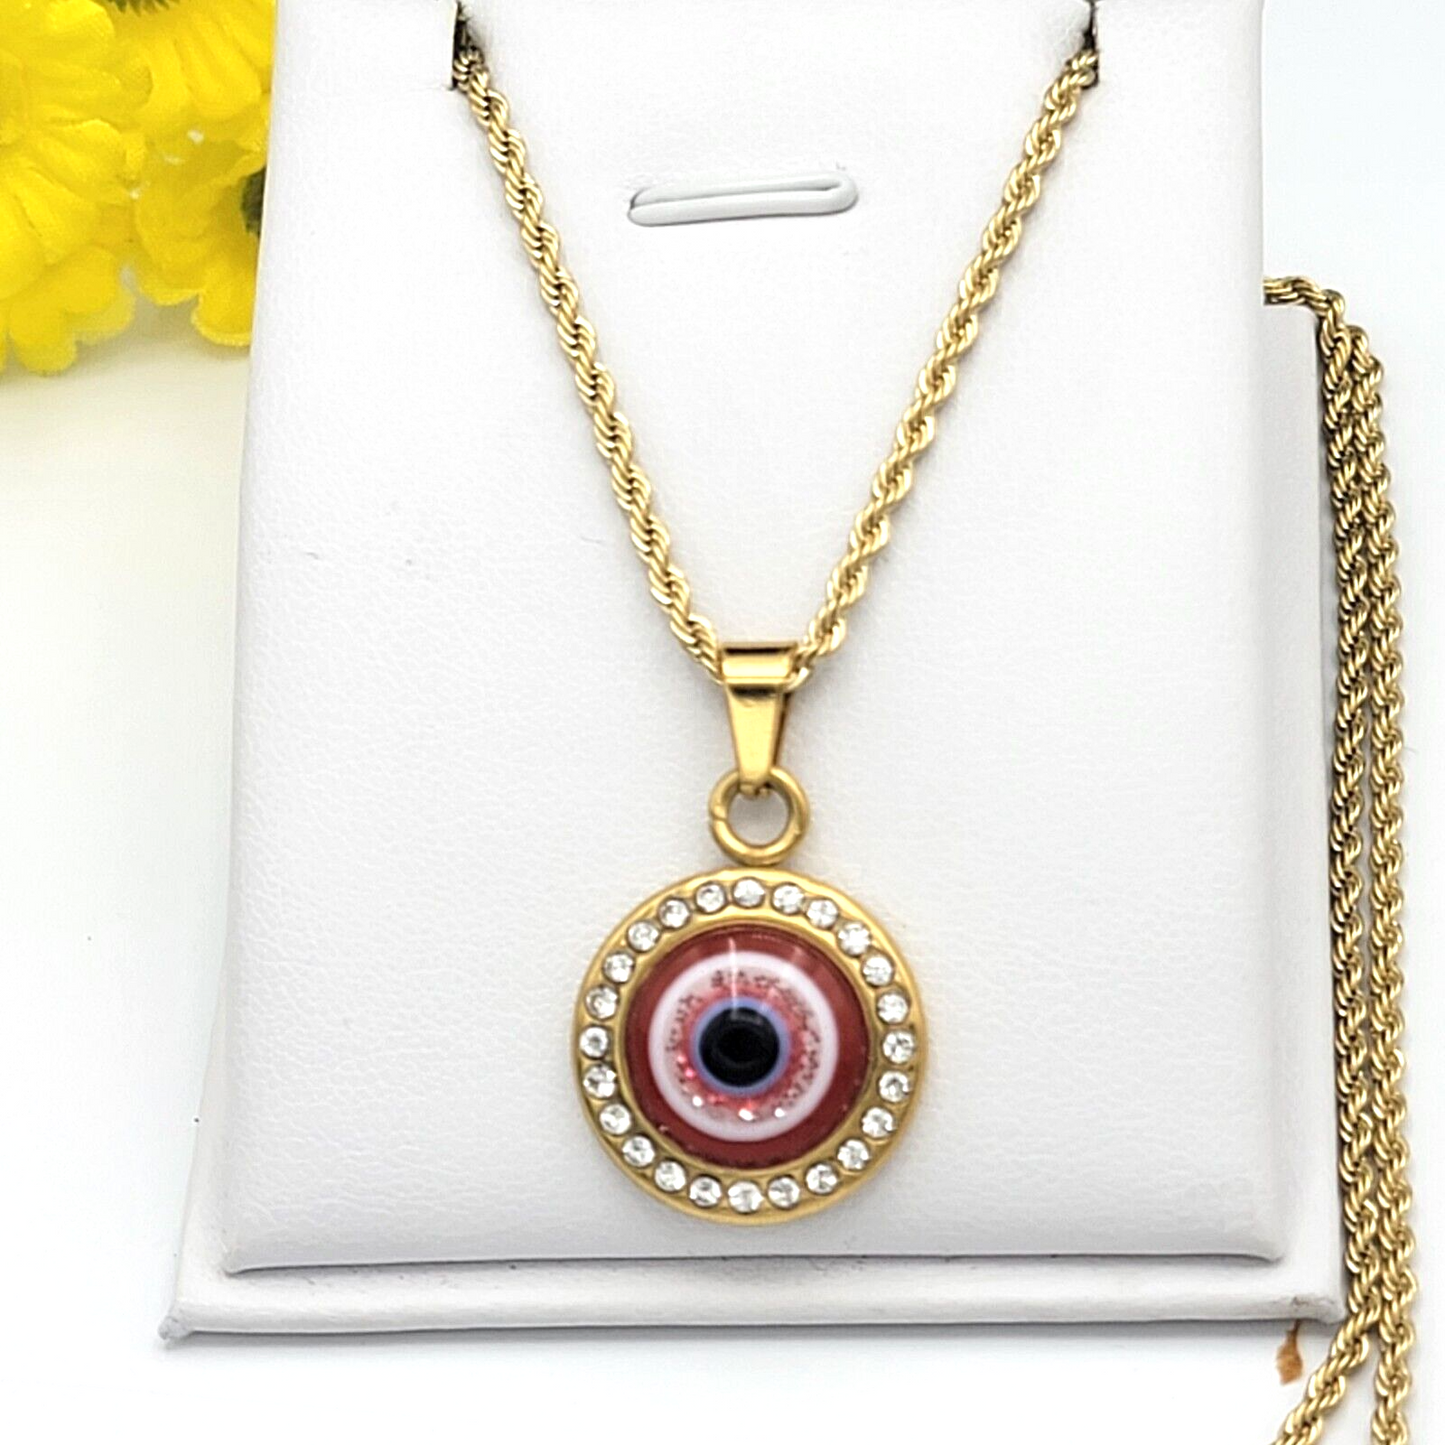 Necklaces - Stainless Steel Gold Plated. Red Eye Pendant Pendant & Chain.